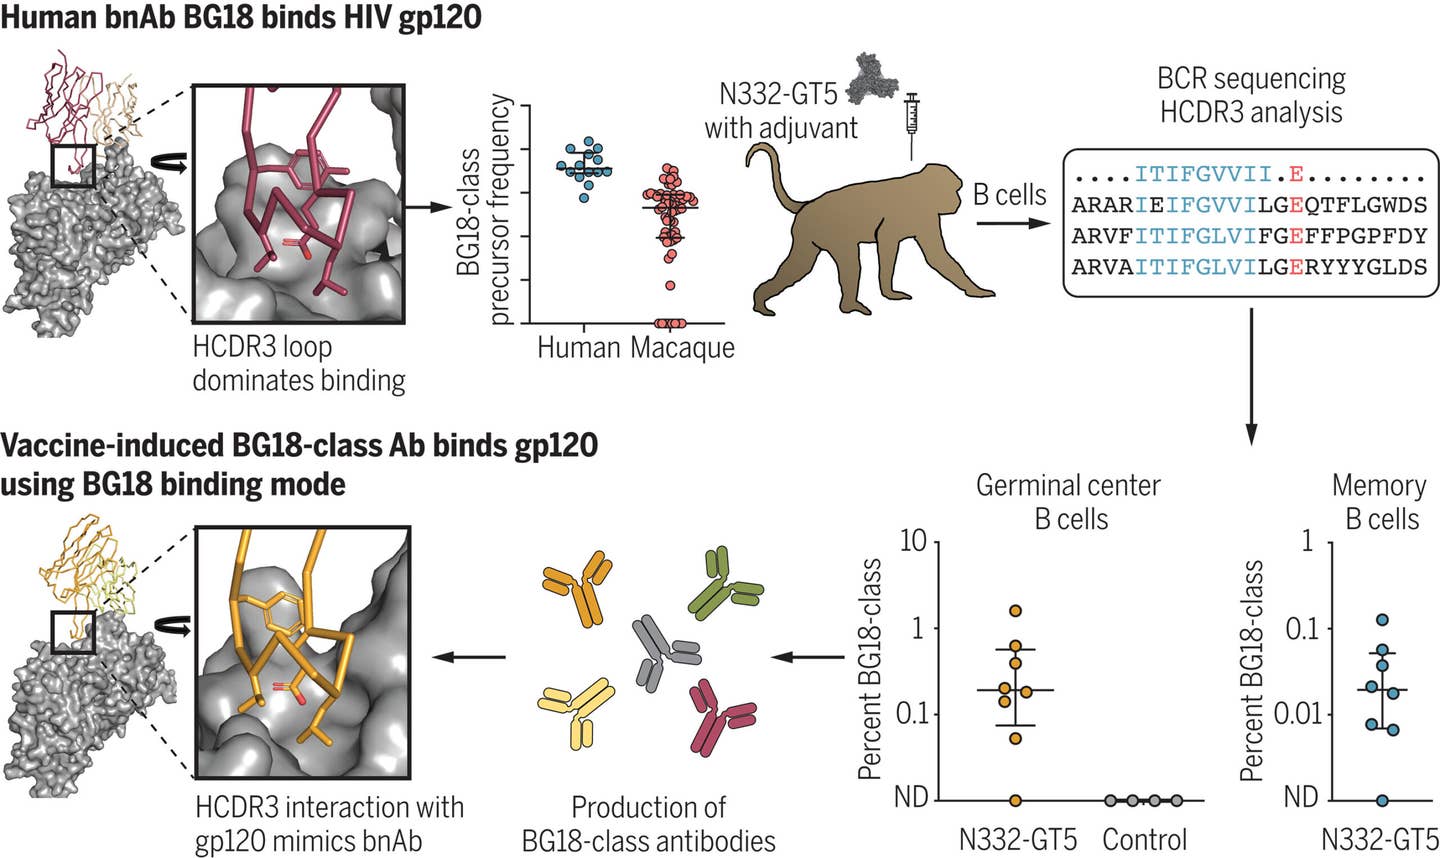 Test of HCDR3-dominant germline targeting in RMs. The HIV bnAb BG18 uses an HCDR3-dominant binding mode. BG18-class naïve precursors occur at low frequency in humans and RMs.